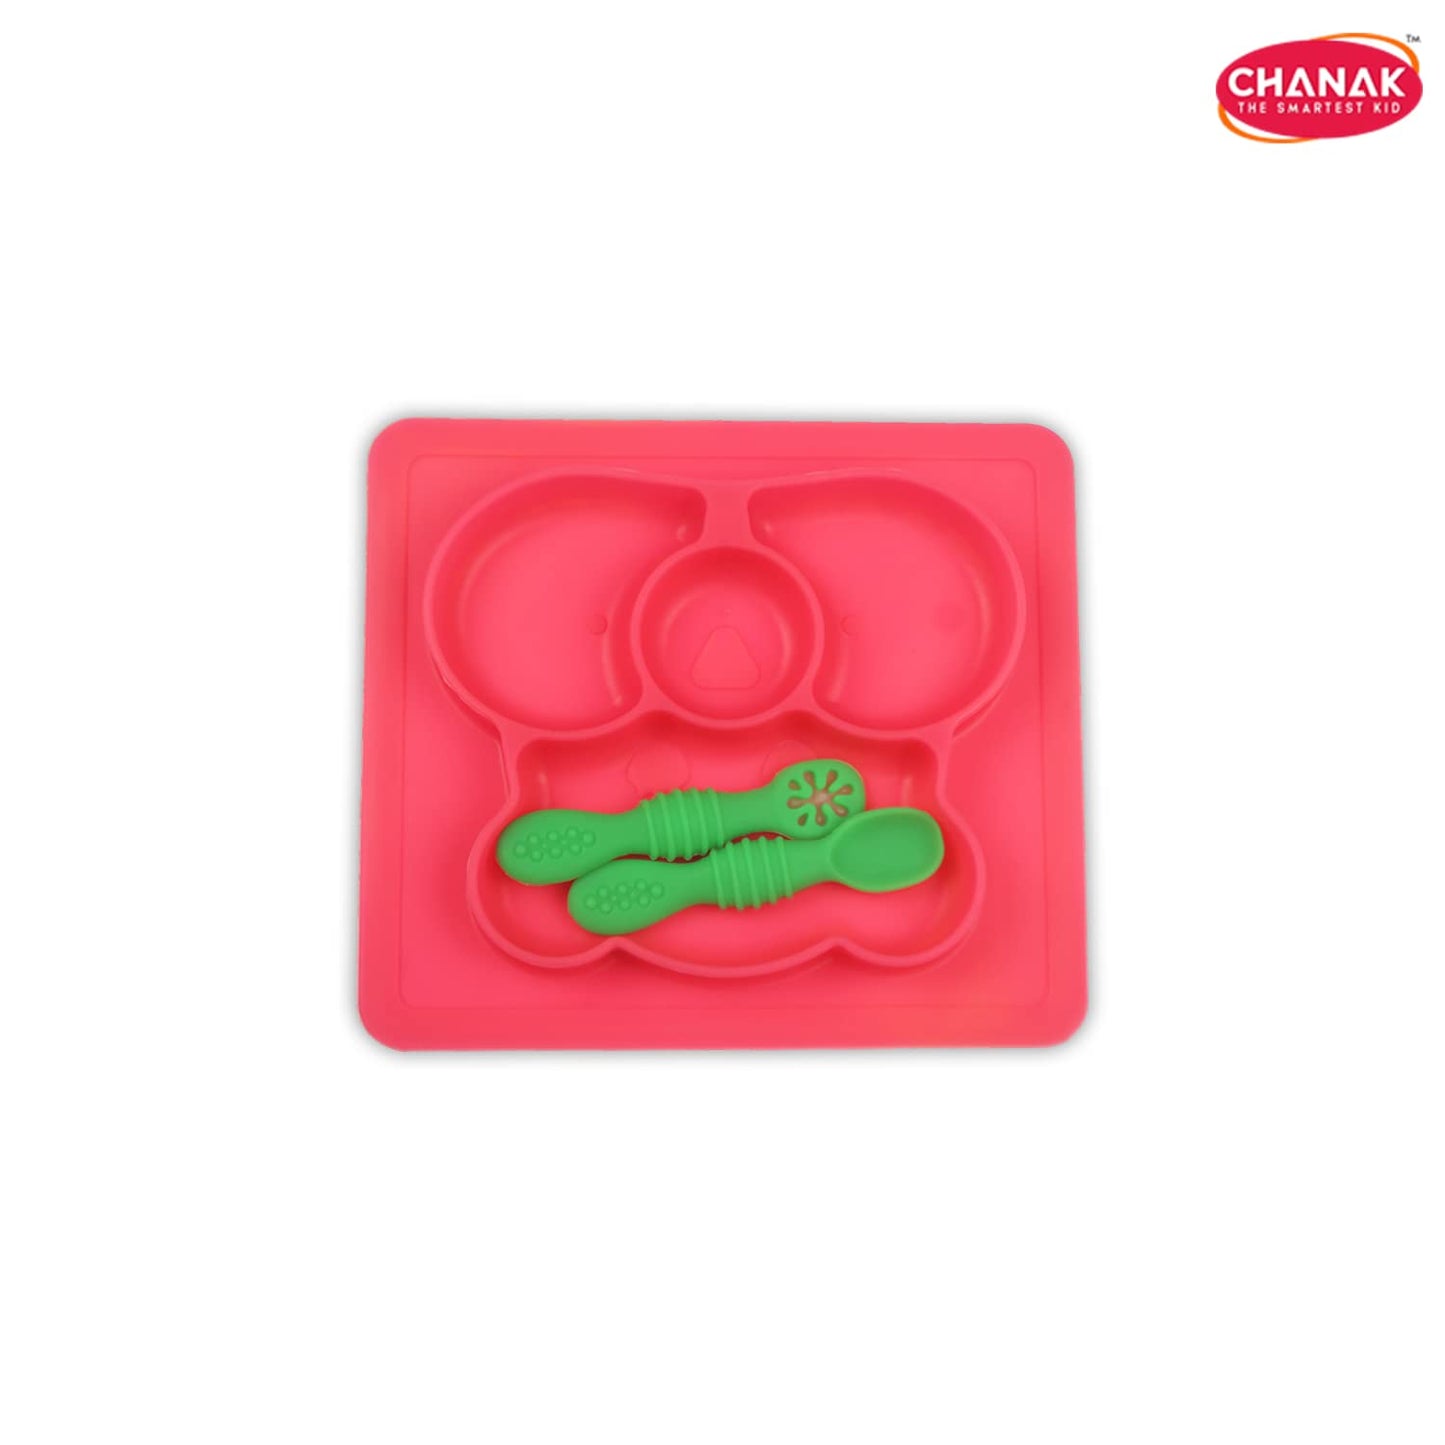 Chanak Baby Food Tray - Silicon Plate with Multiple Compartments & Two Spoons (Pink)